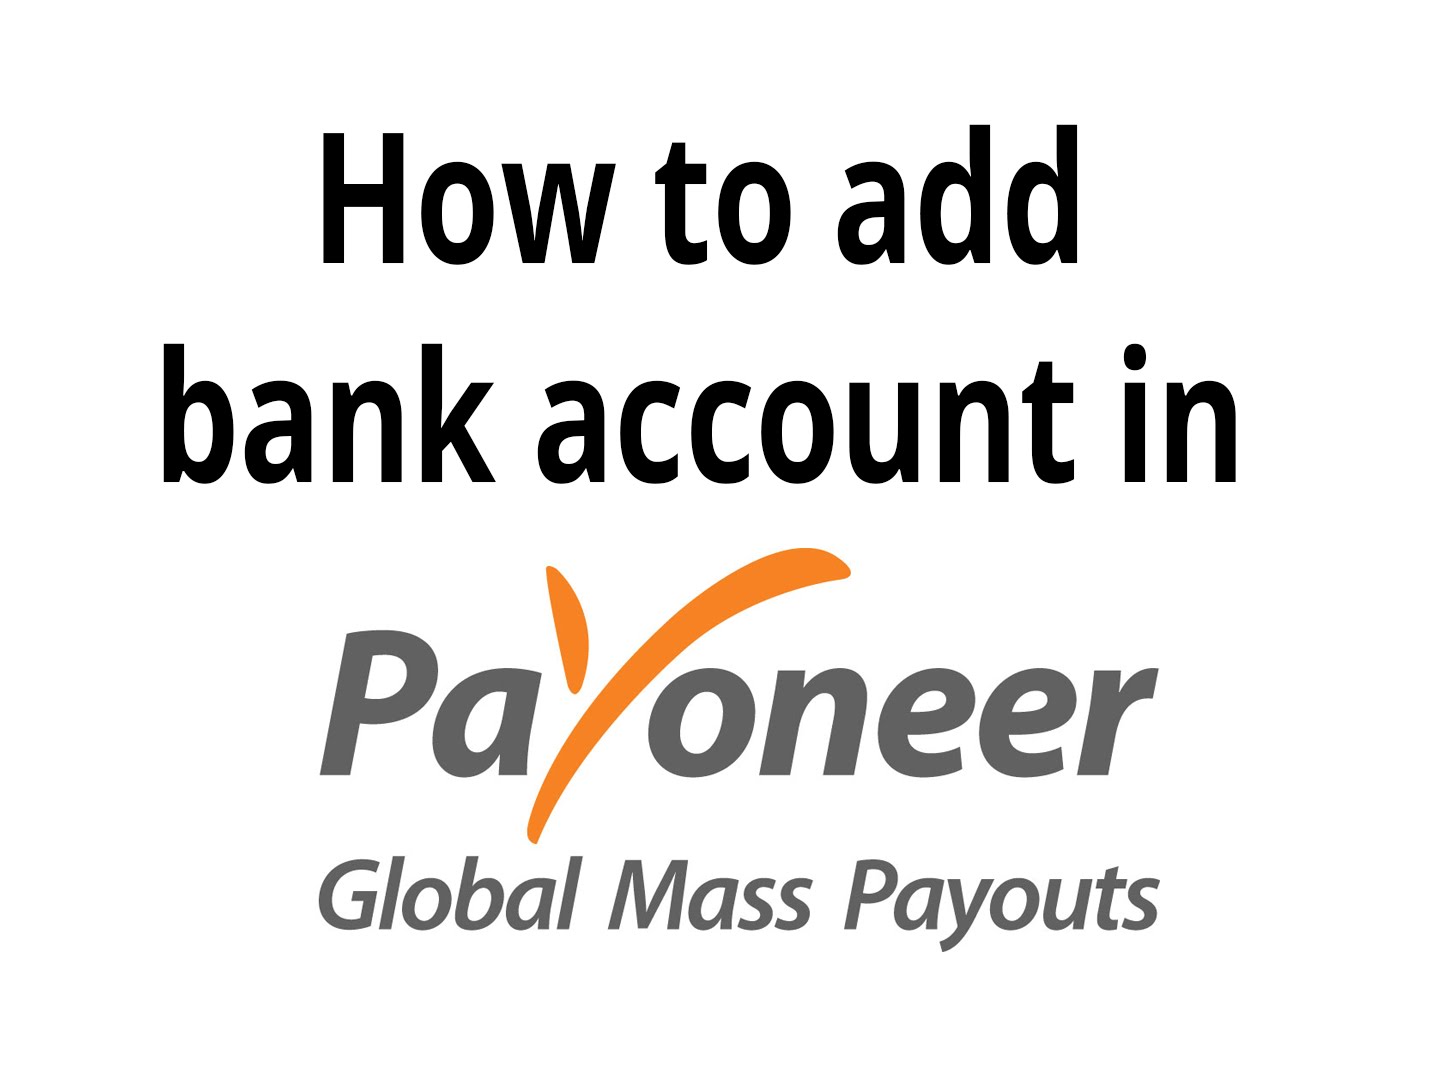 Payoneer. Wise Payoneer. Bank adds. In account. Bank add